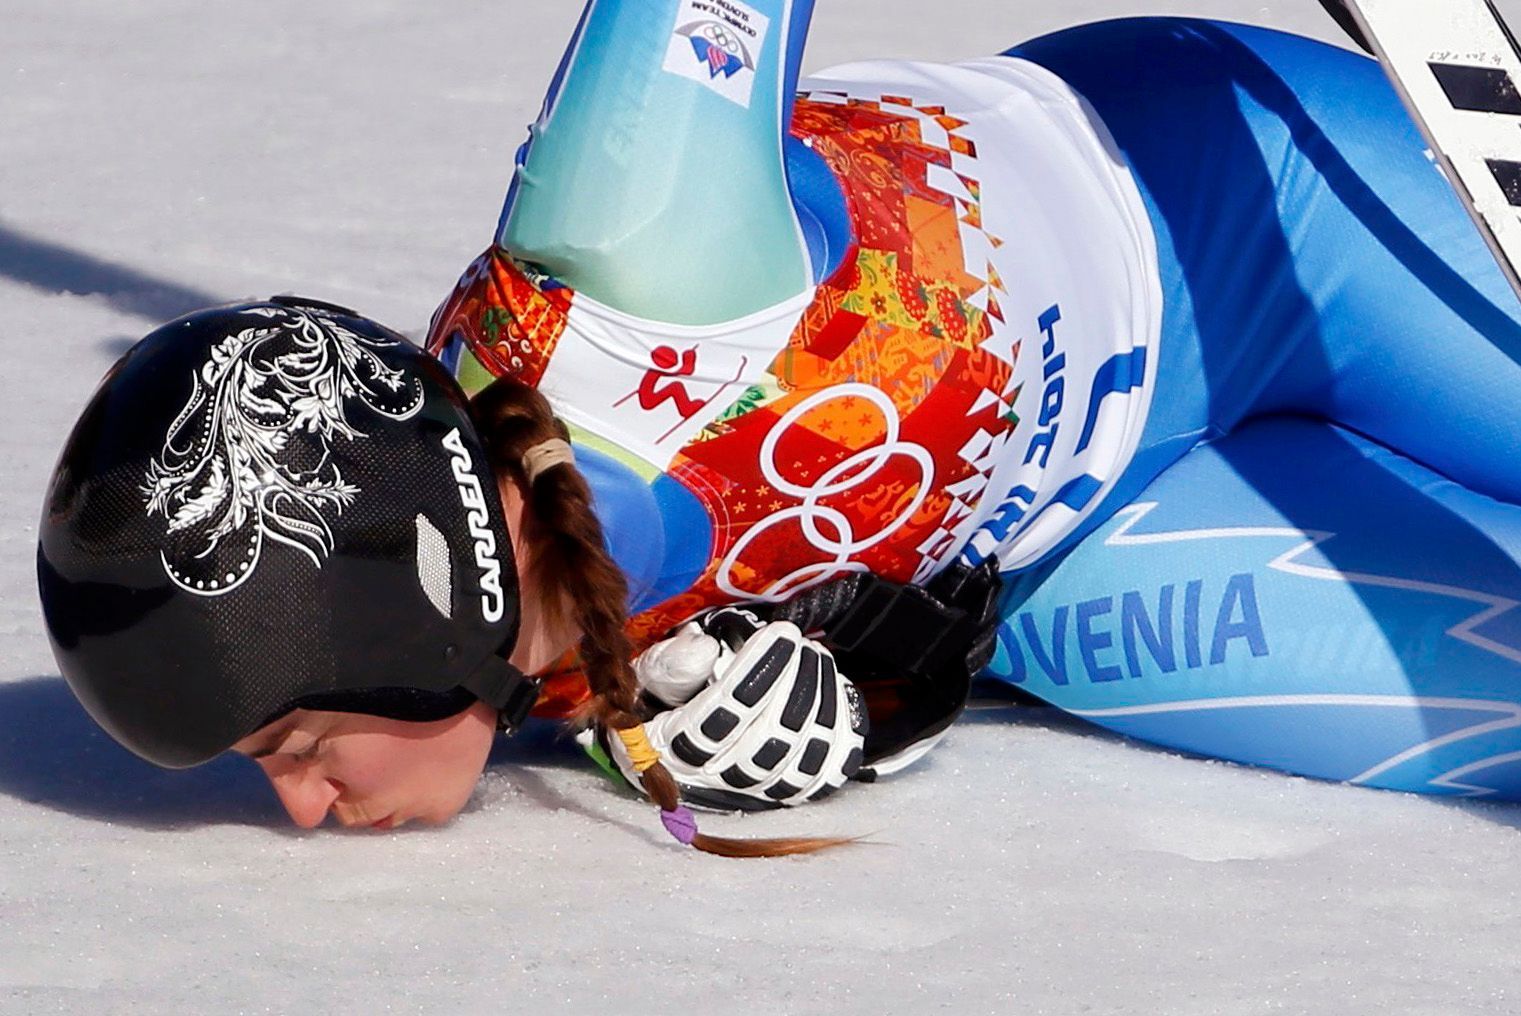 Slovenia's Tina Maze kisses the ground after winning the women's alpine skiing downhill race at the Sochi 2014 Winter Olympics